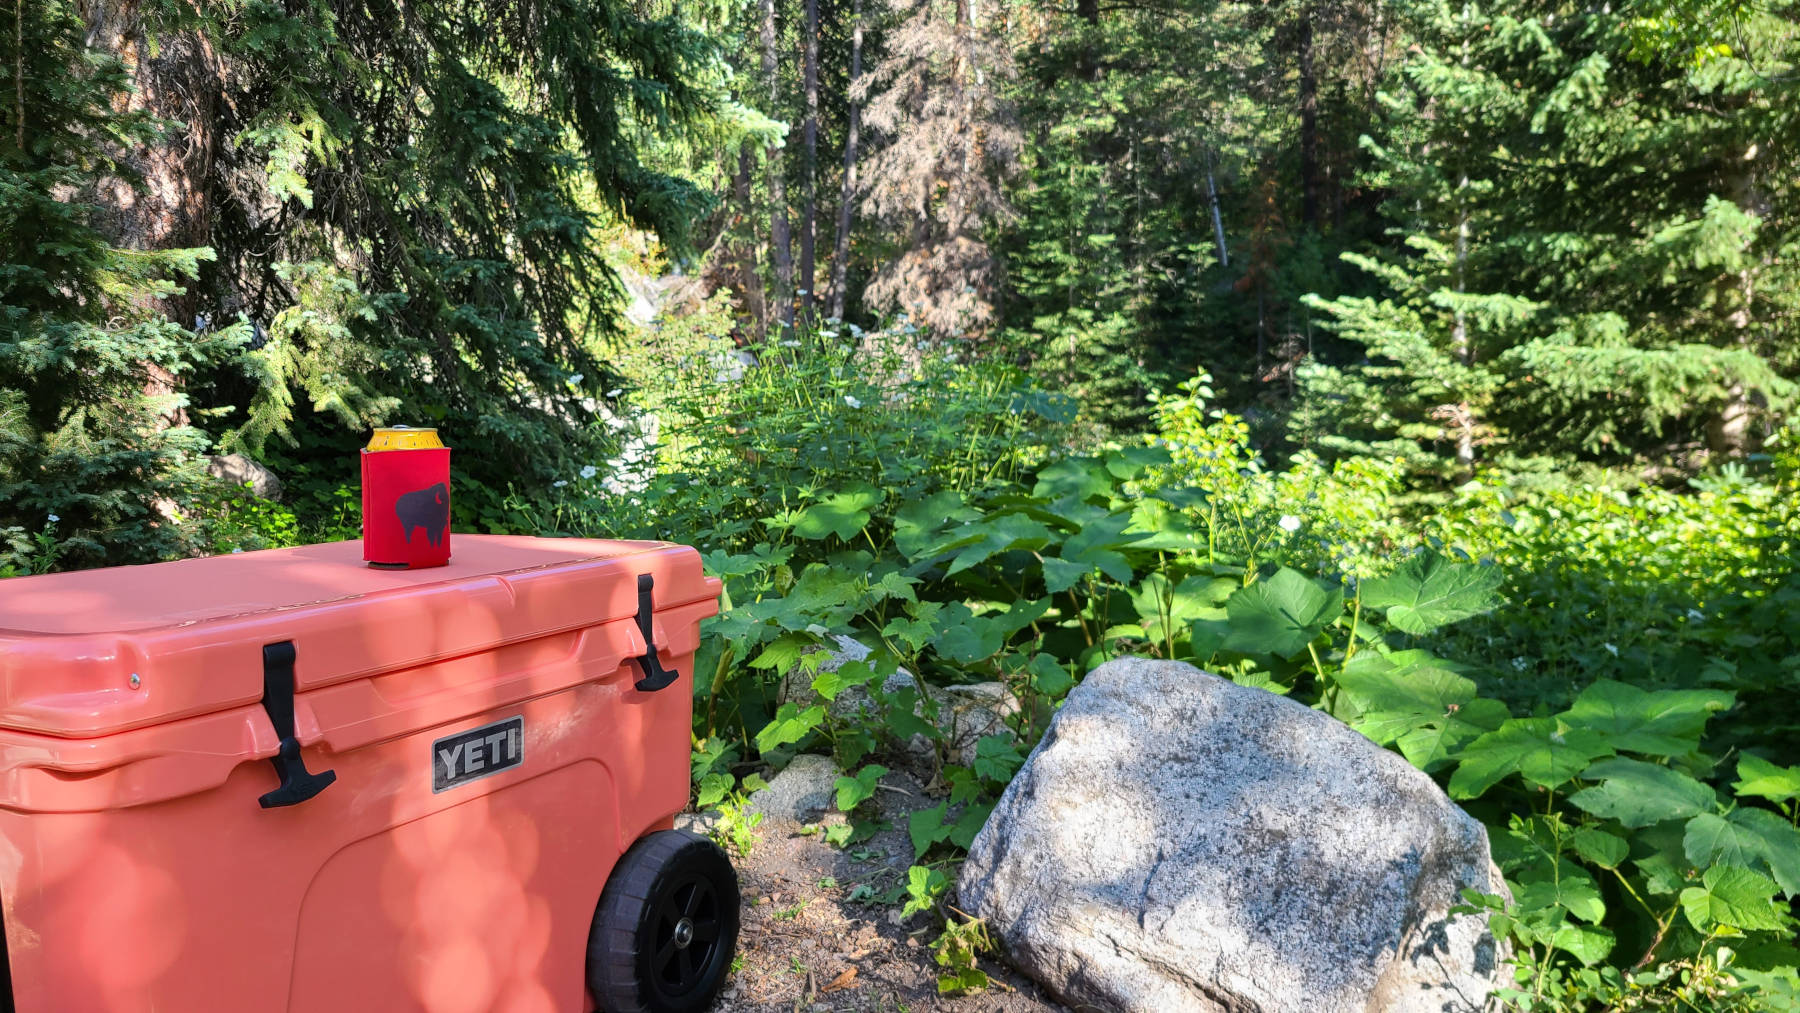 Using our YETI to keep food cold at our campsite - Hello Trail